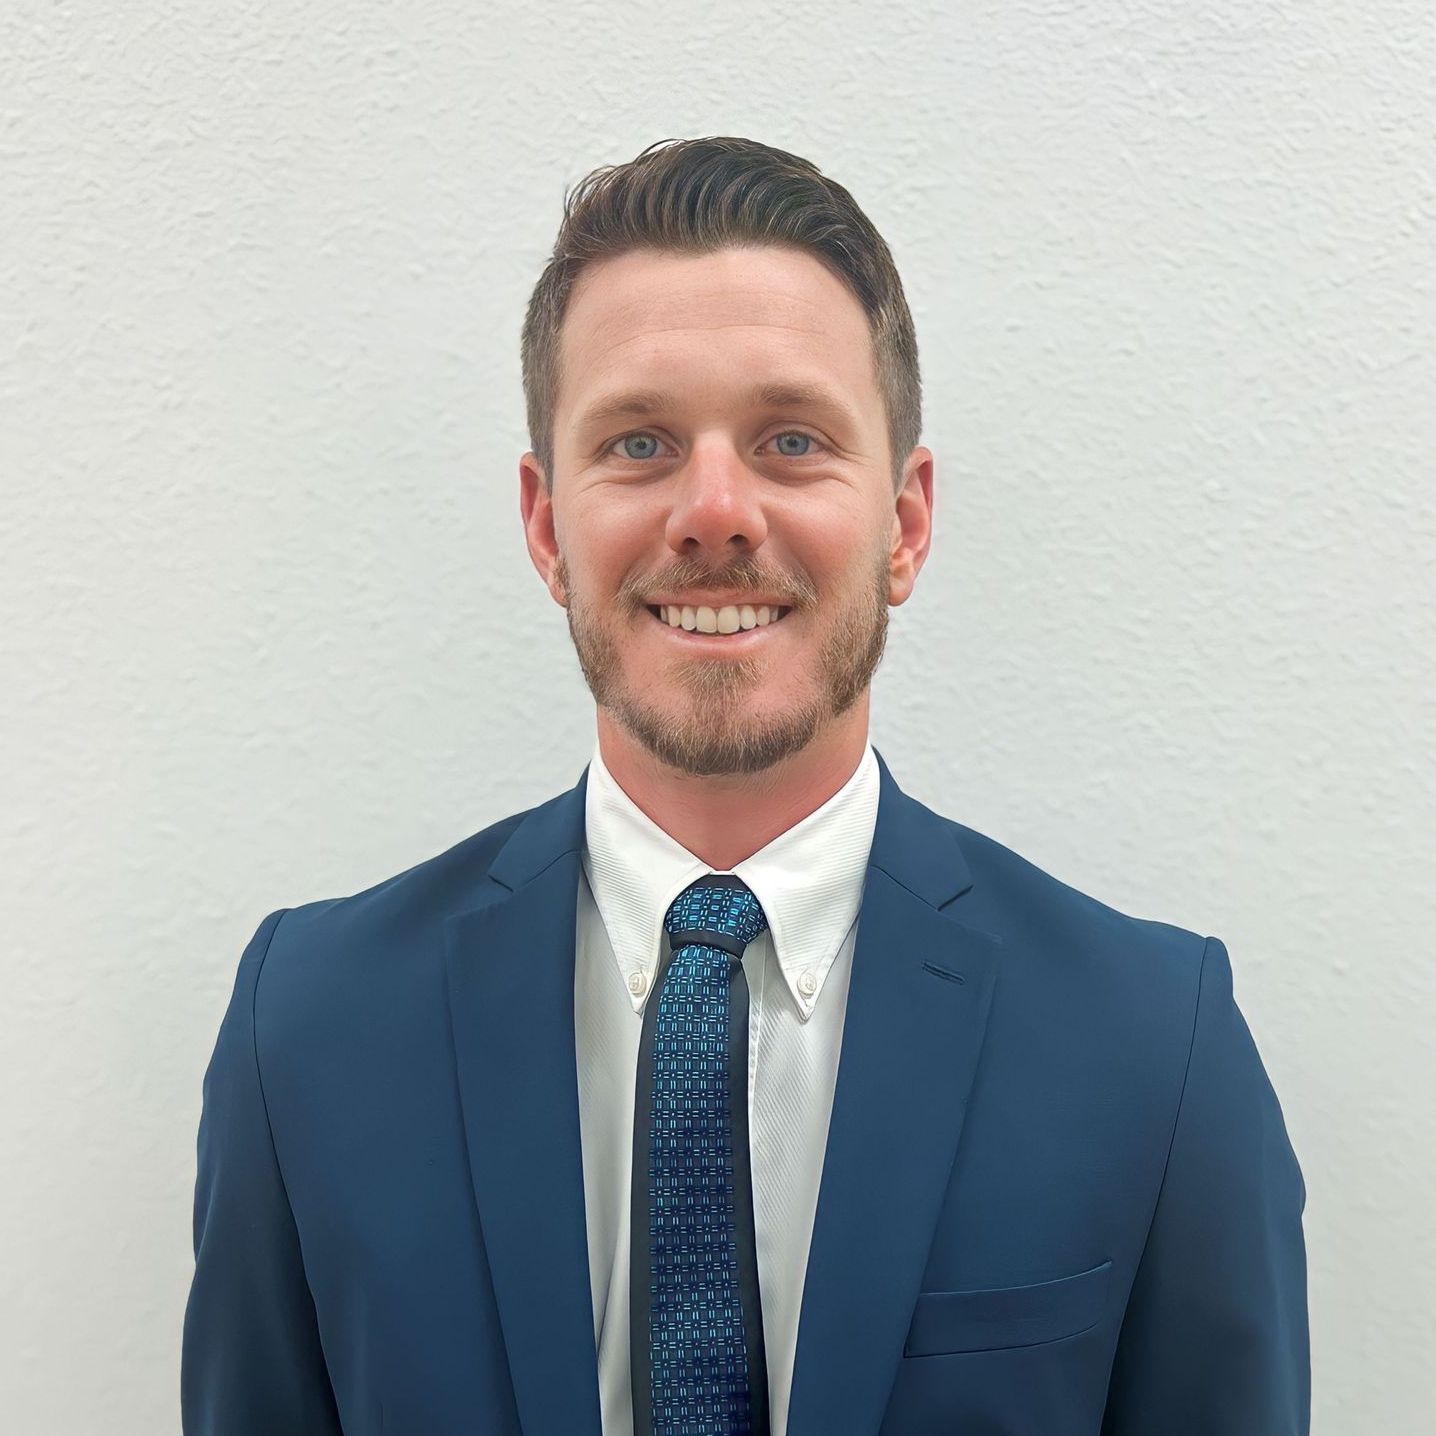 A Local Realtor in Fallon, Nevada. Riley Horn from The Faught Group